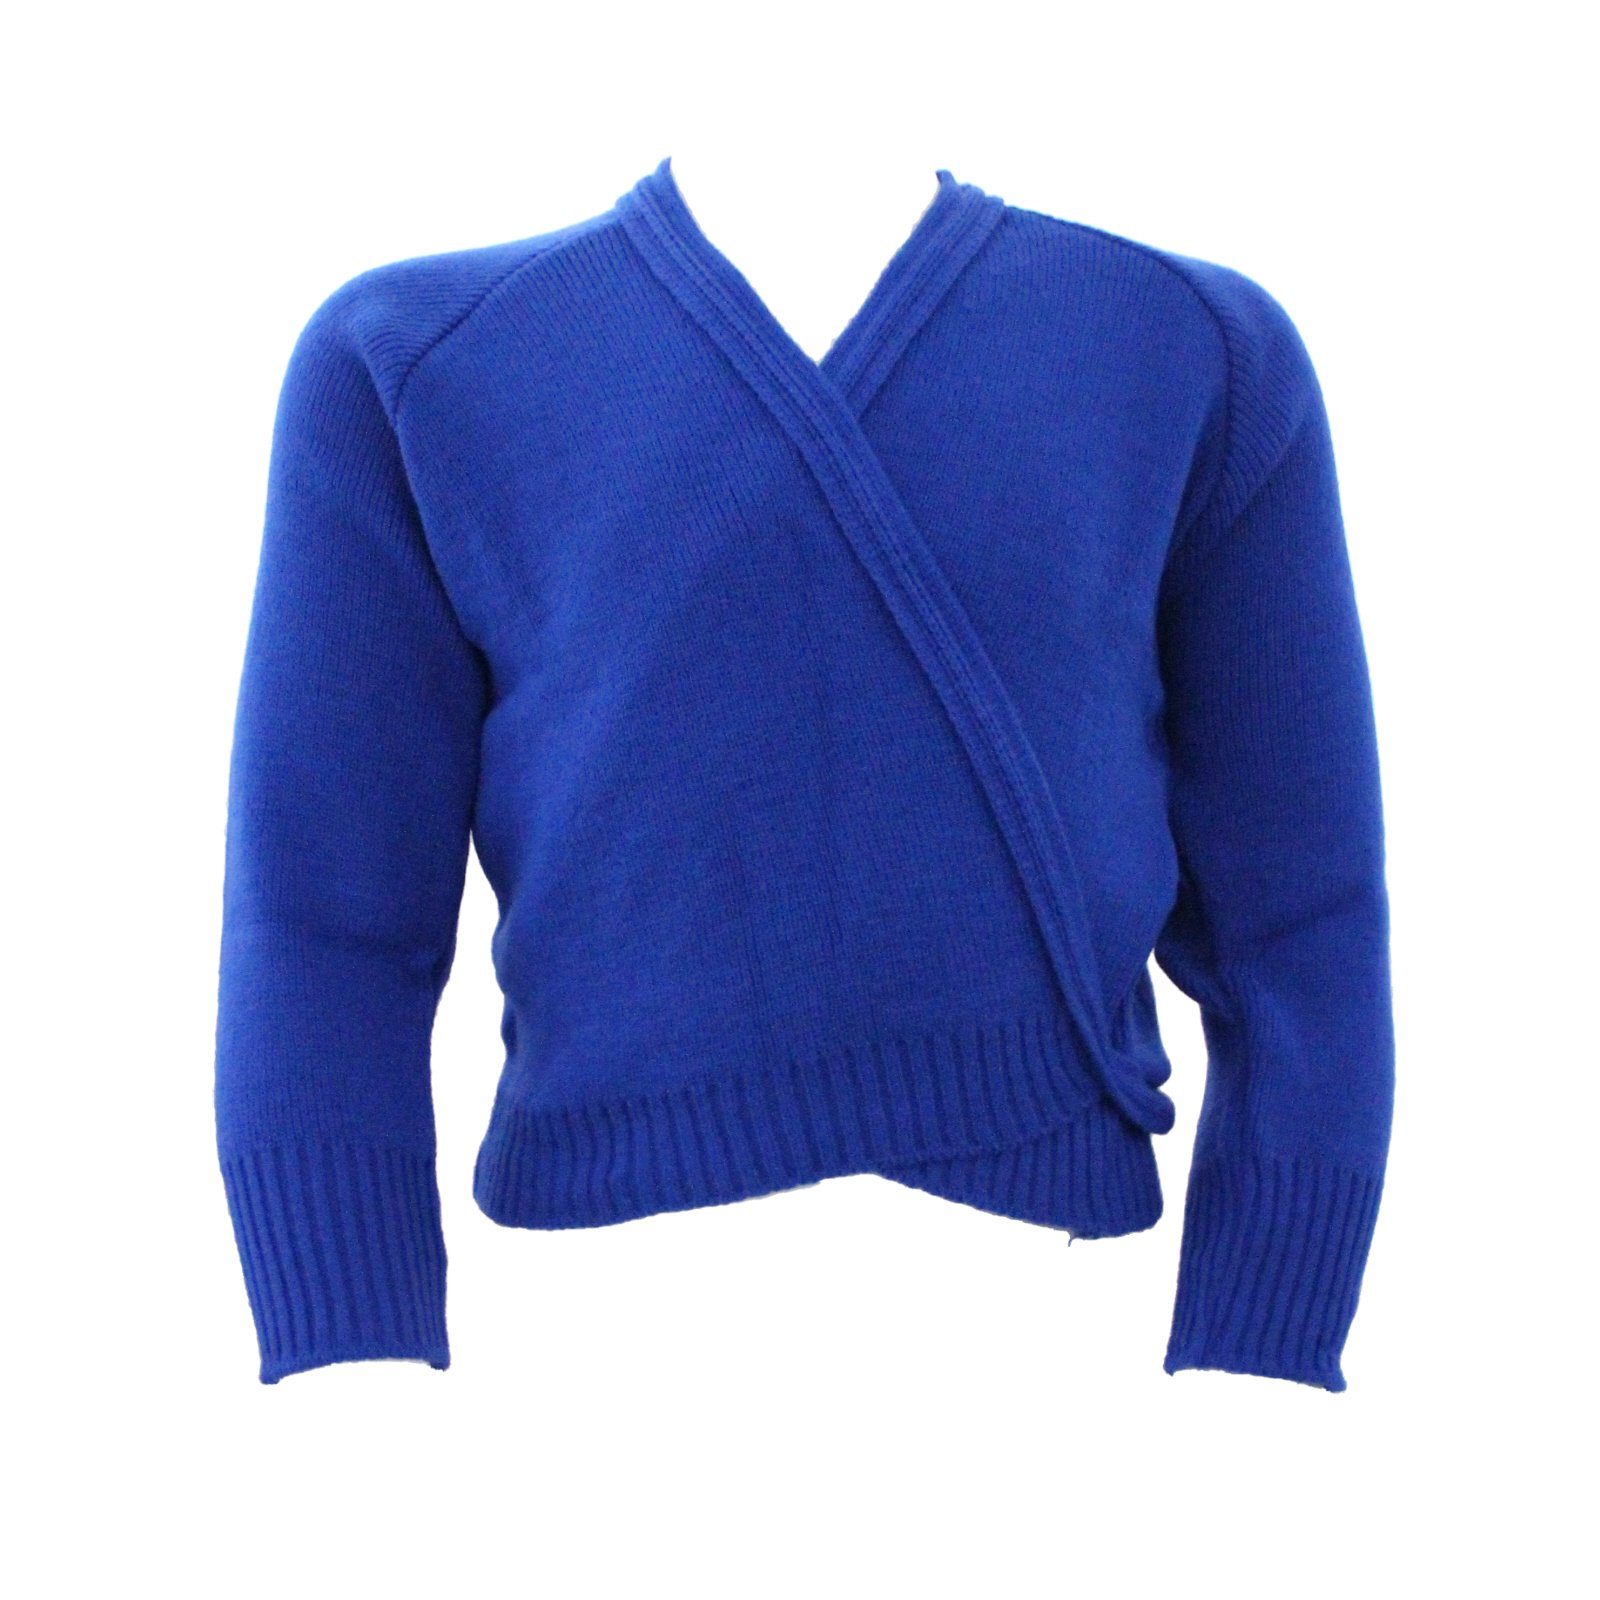 KNITTED ACRYLIC CROSSOVER BALLET / ICE SKATING CARDIGAN Dancewear Dancers World Royal Blue 22" chest 